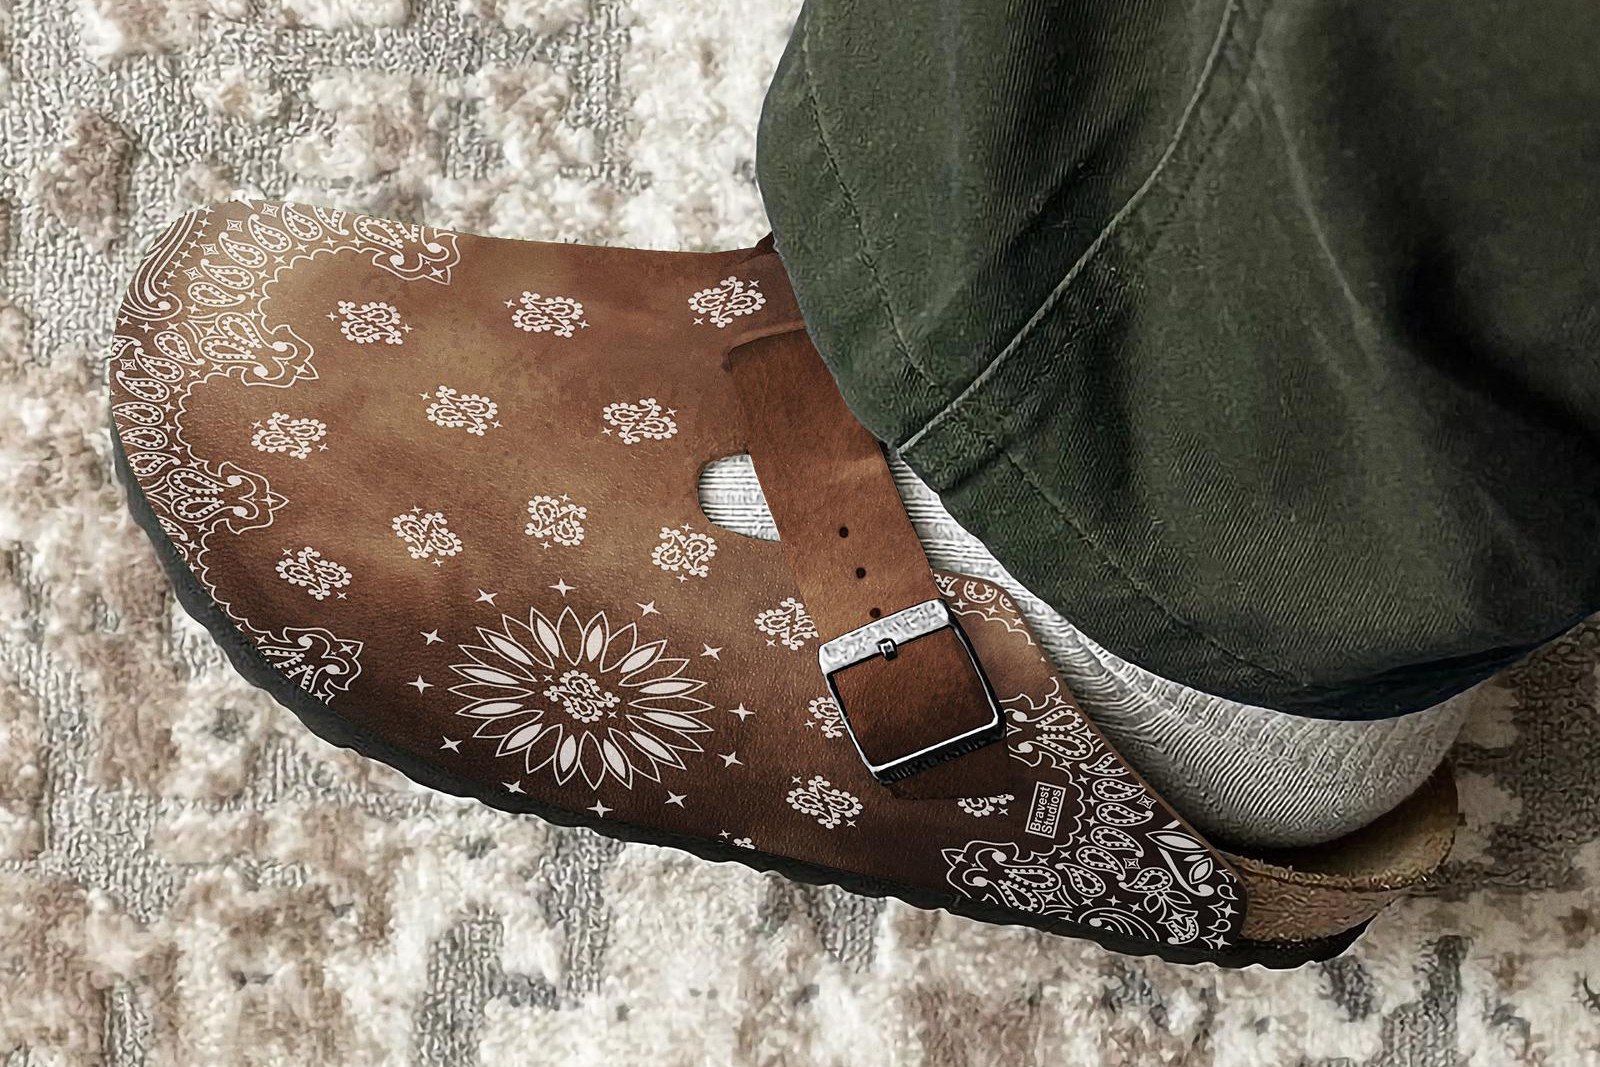 Bravest Studios Welcomes Fall With A “Mocha Paisley” London Mule